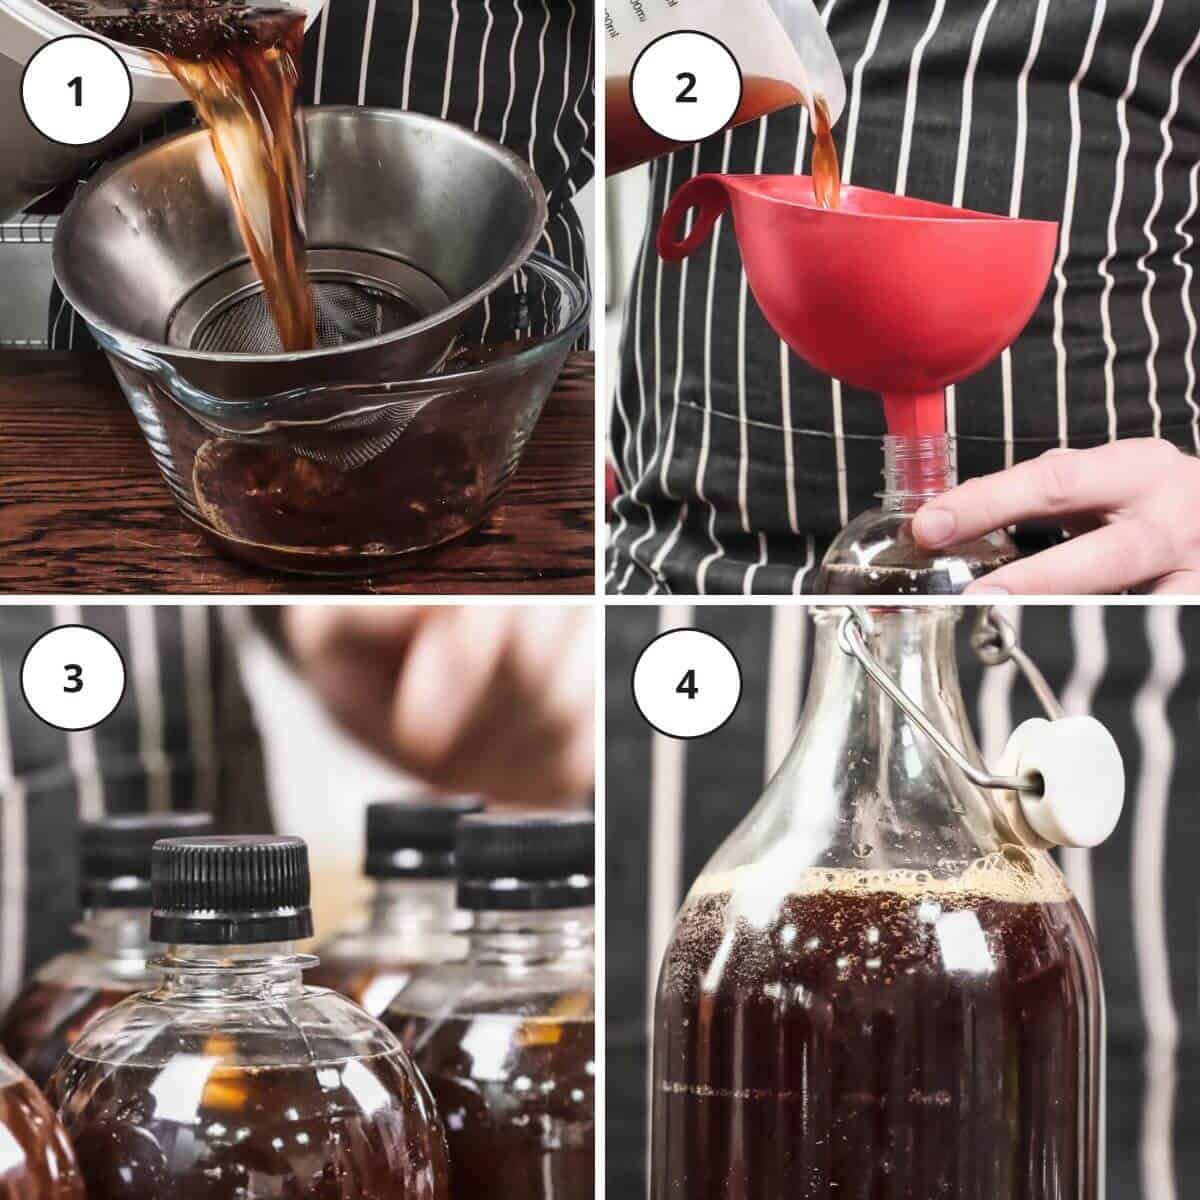 Picture steps how to make Russian bread kvass.